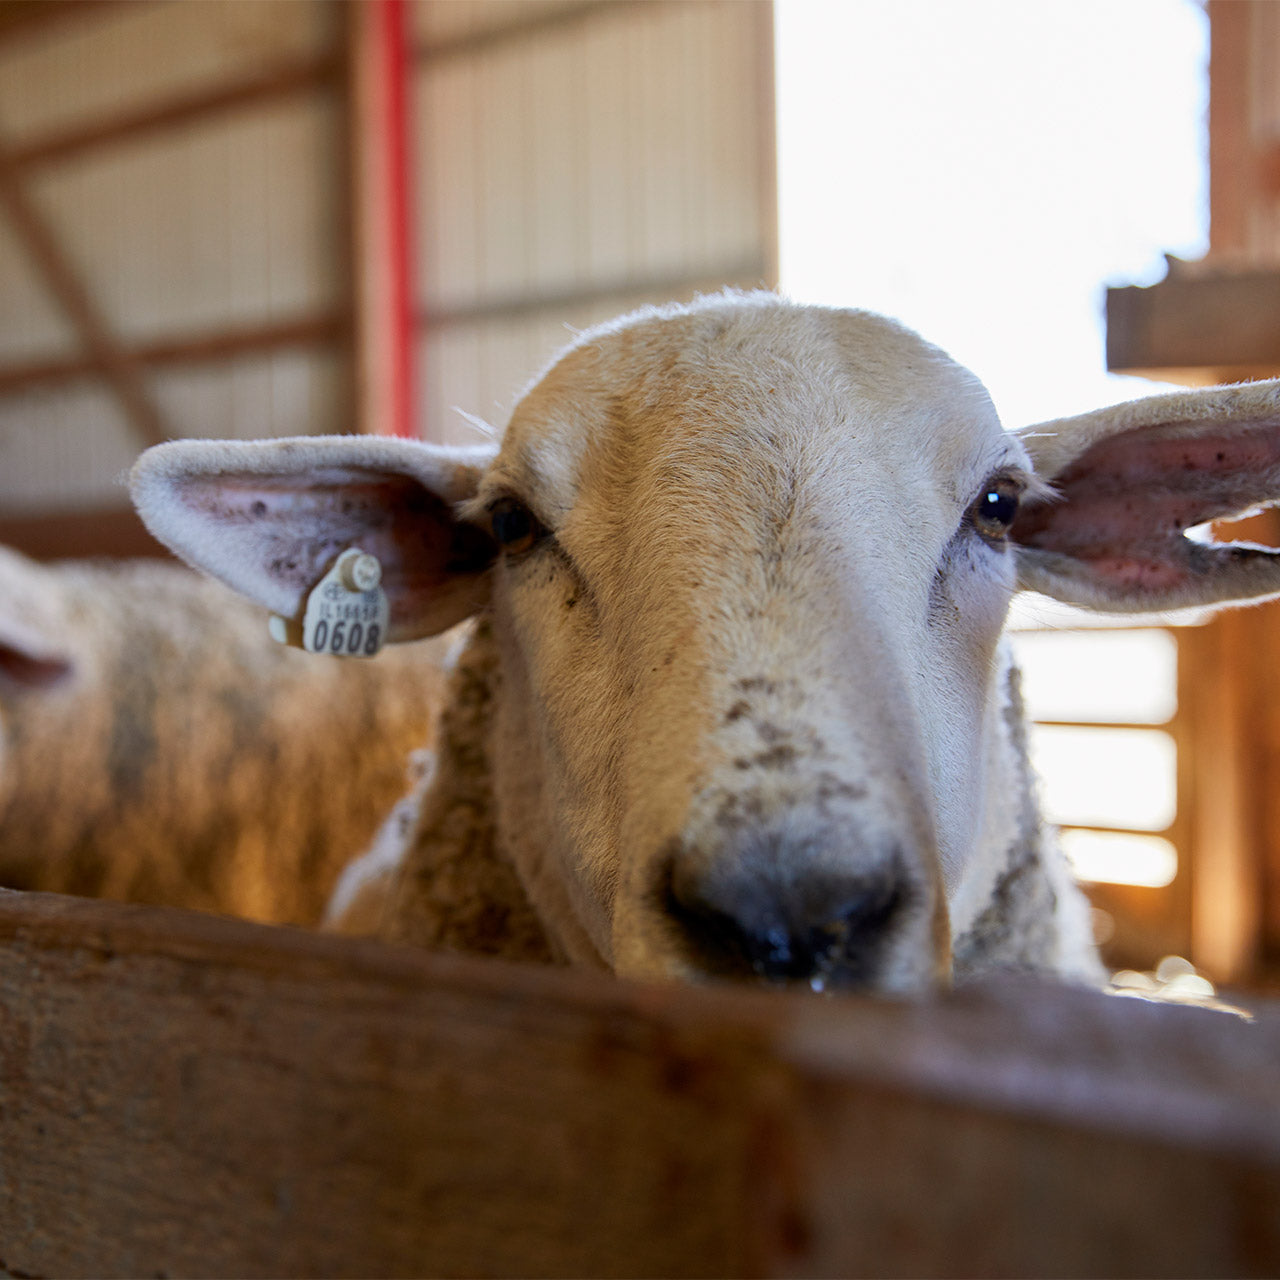 How to provide the right housing for your lambs